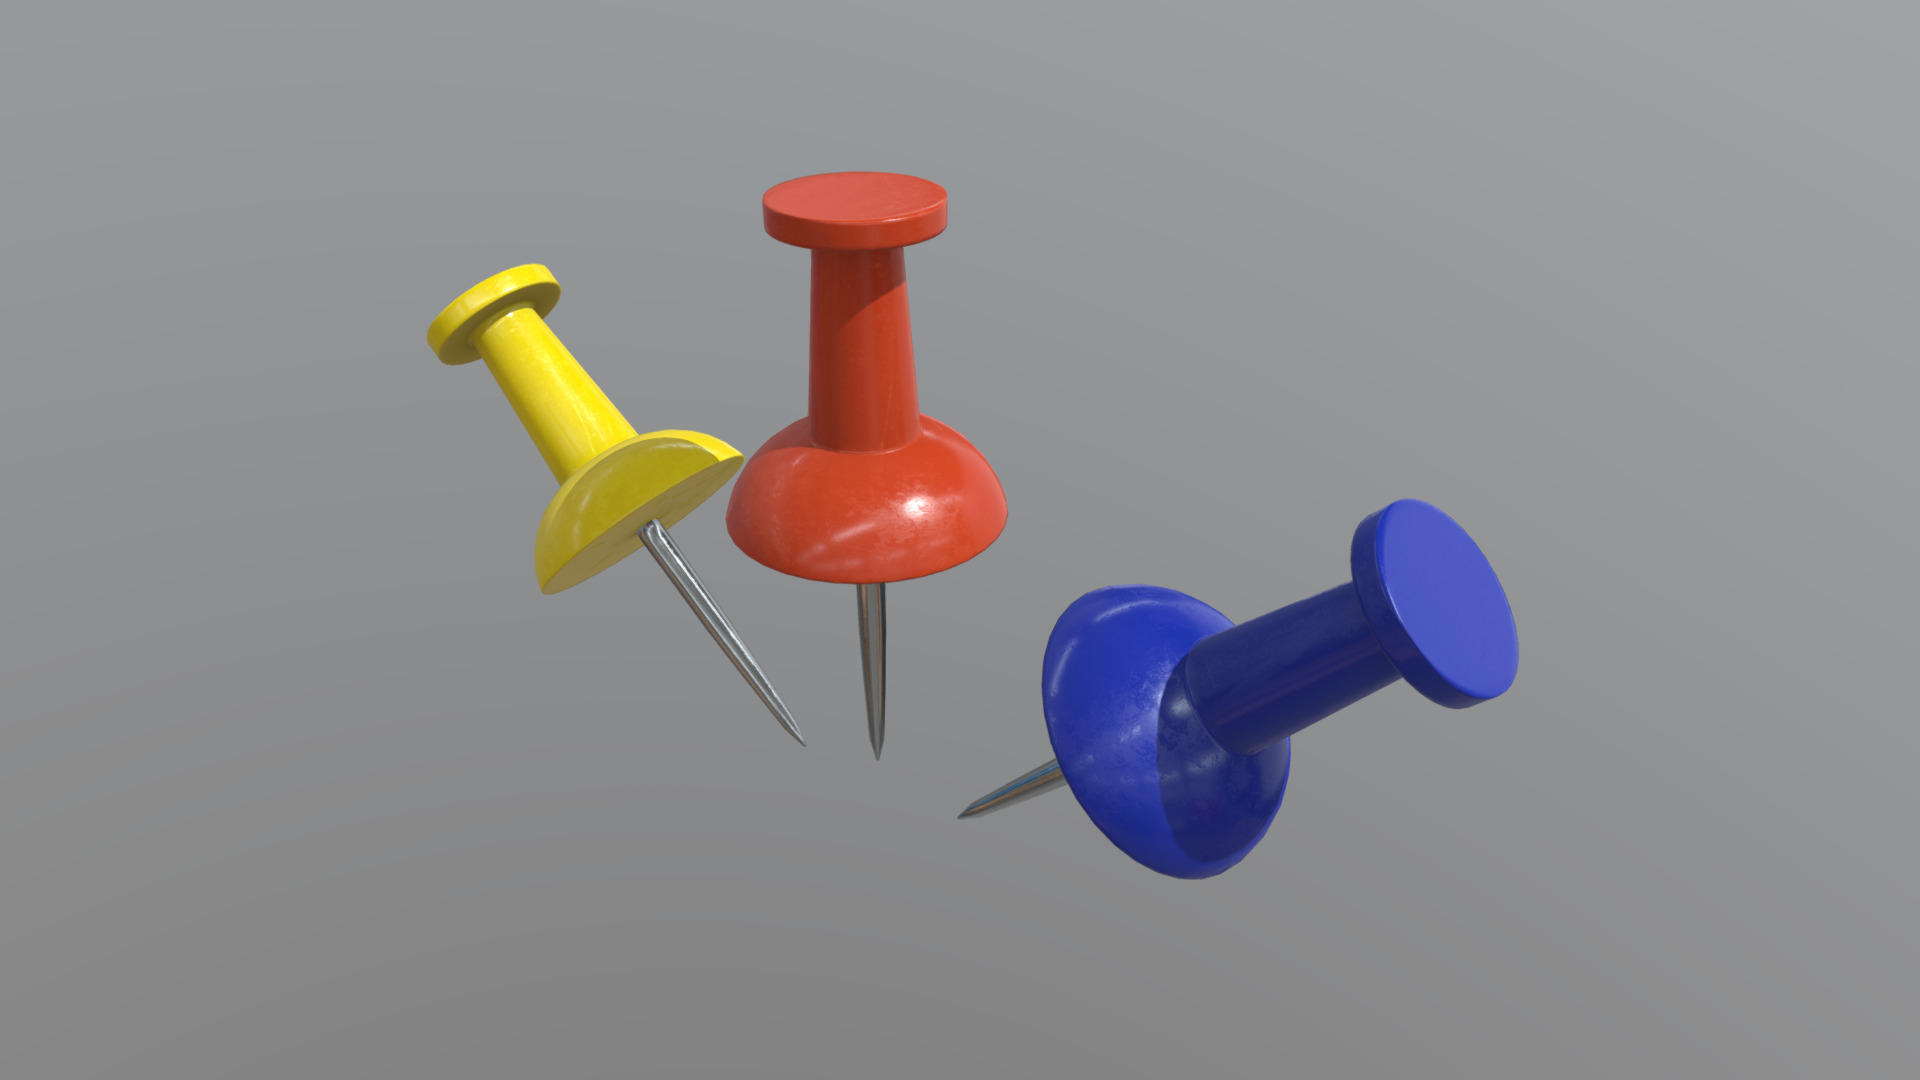 3D model Thumb Tack - This is a 3D model of the Thumb Tack. The 3D model is about a group of colorful balloons.